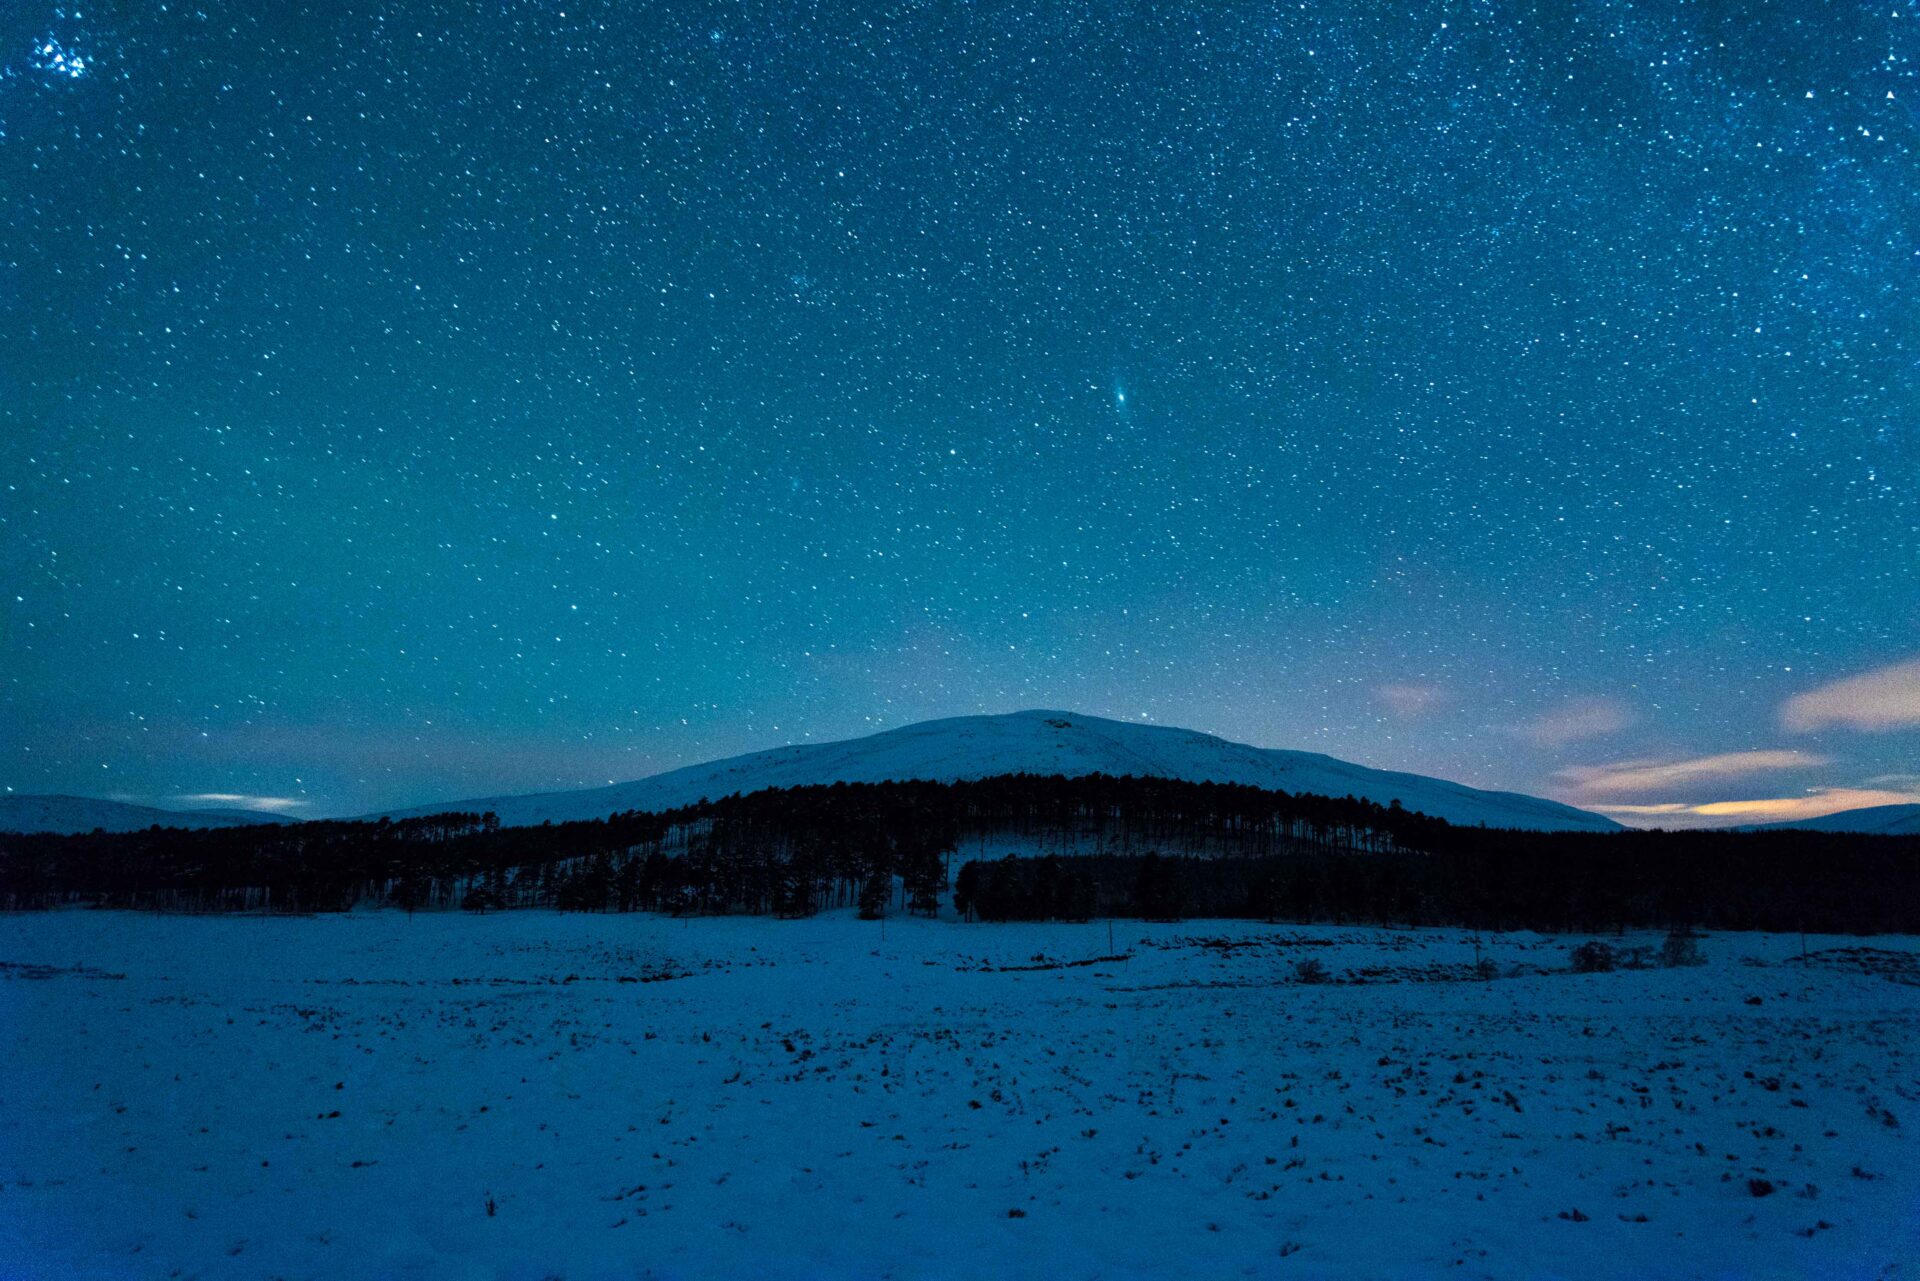 Stargazing in the Cairngorms